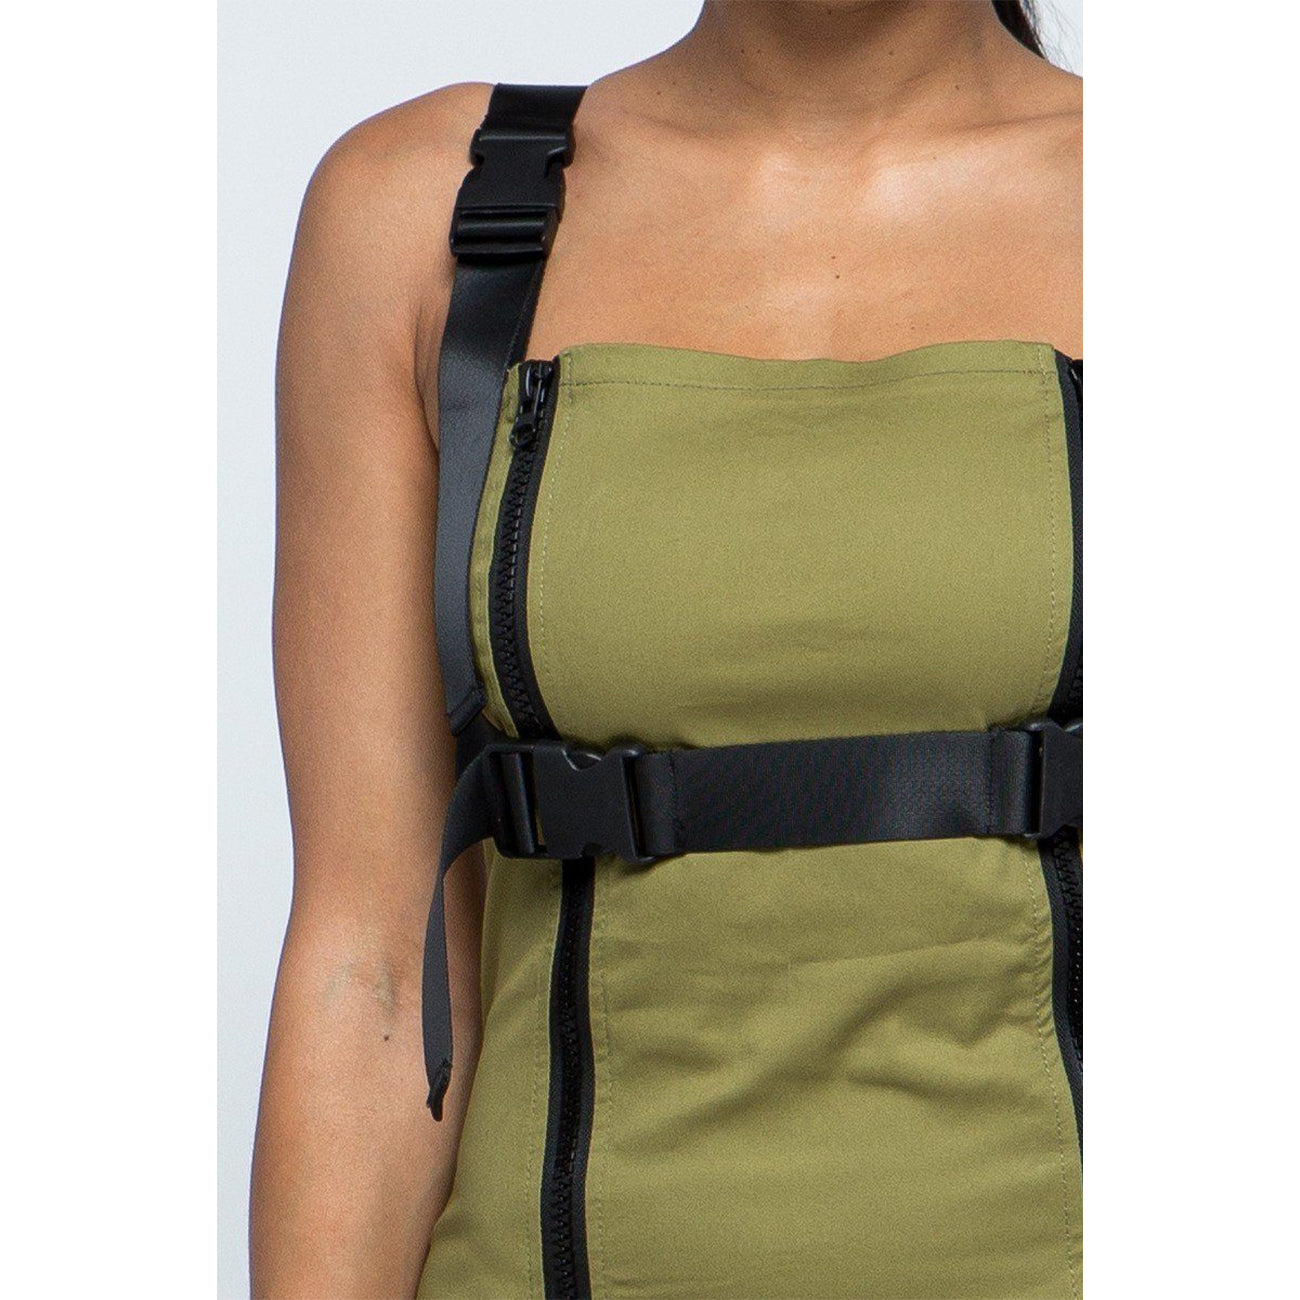 Olive Green Cotton with Buckle Mini Dress